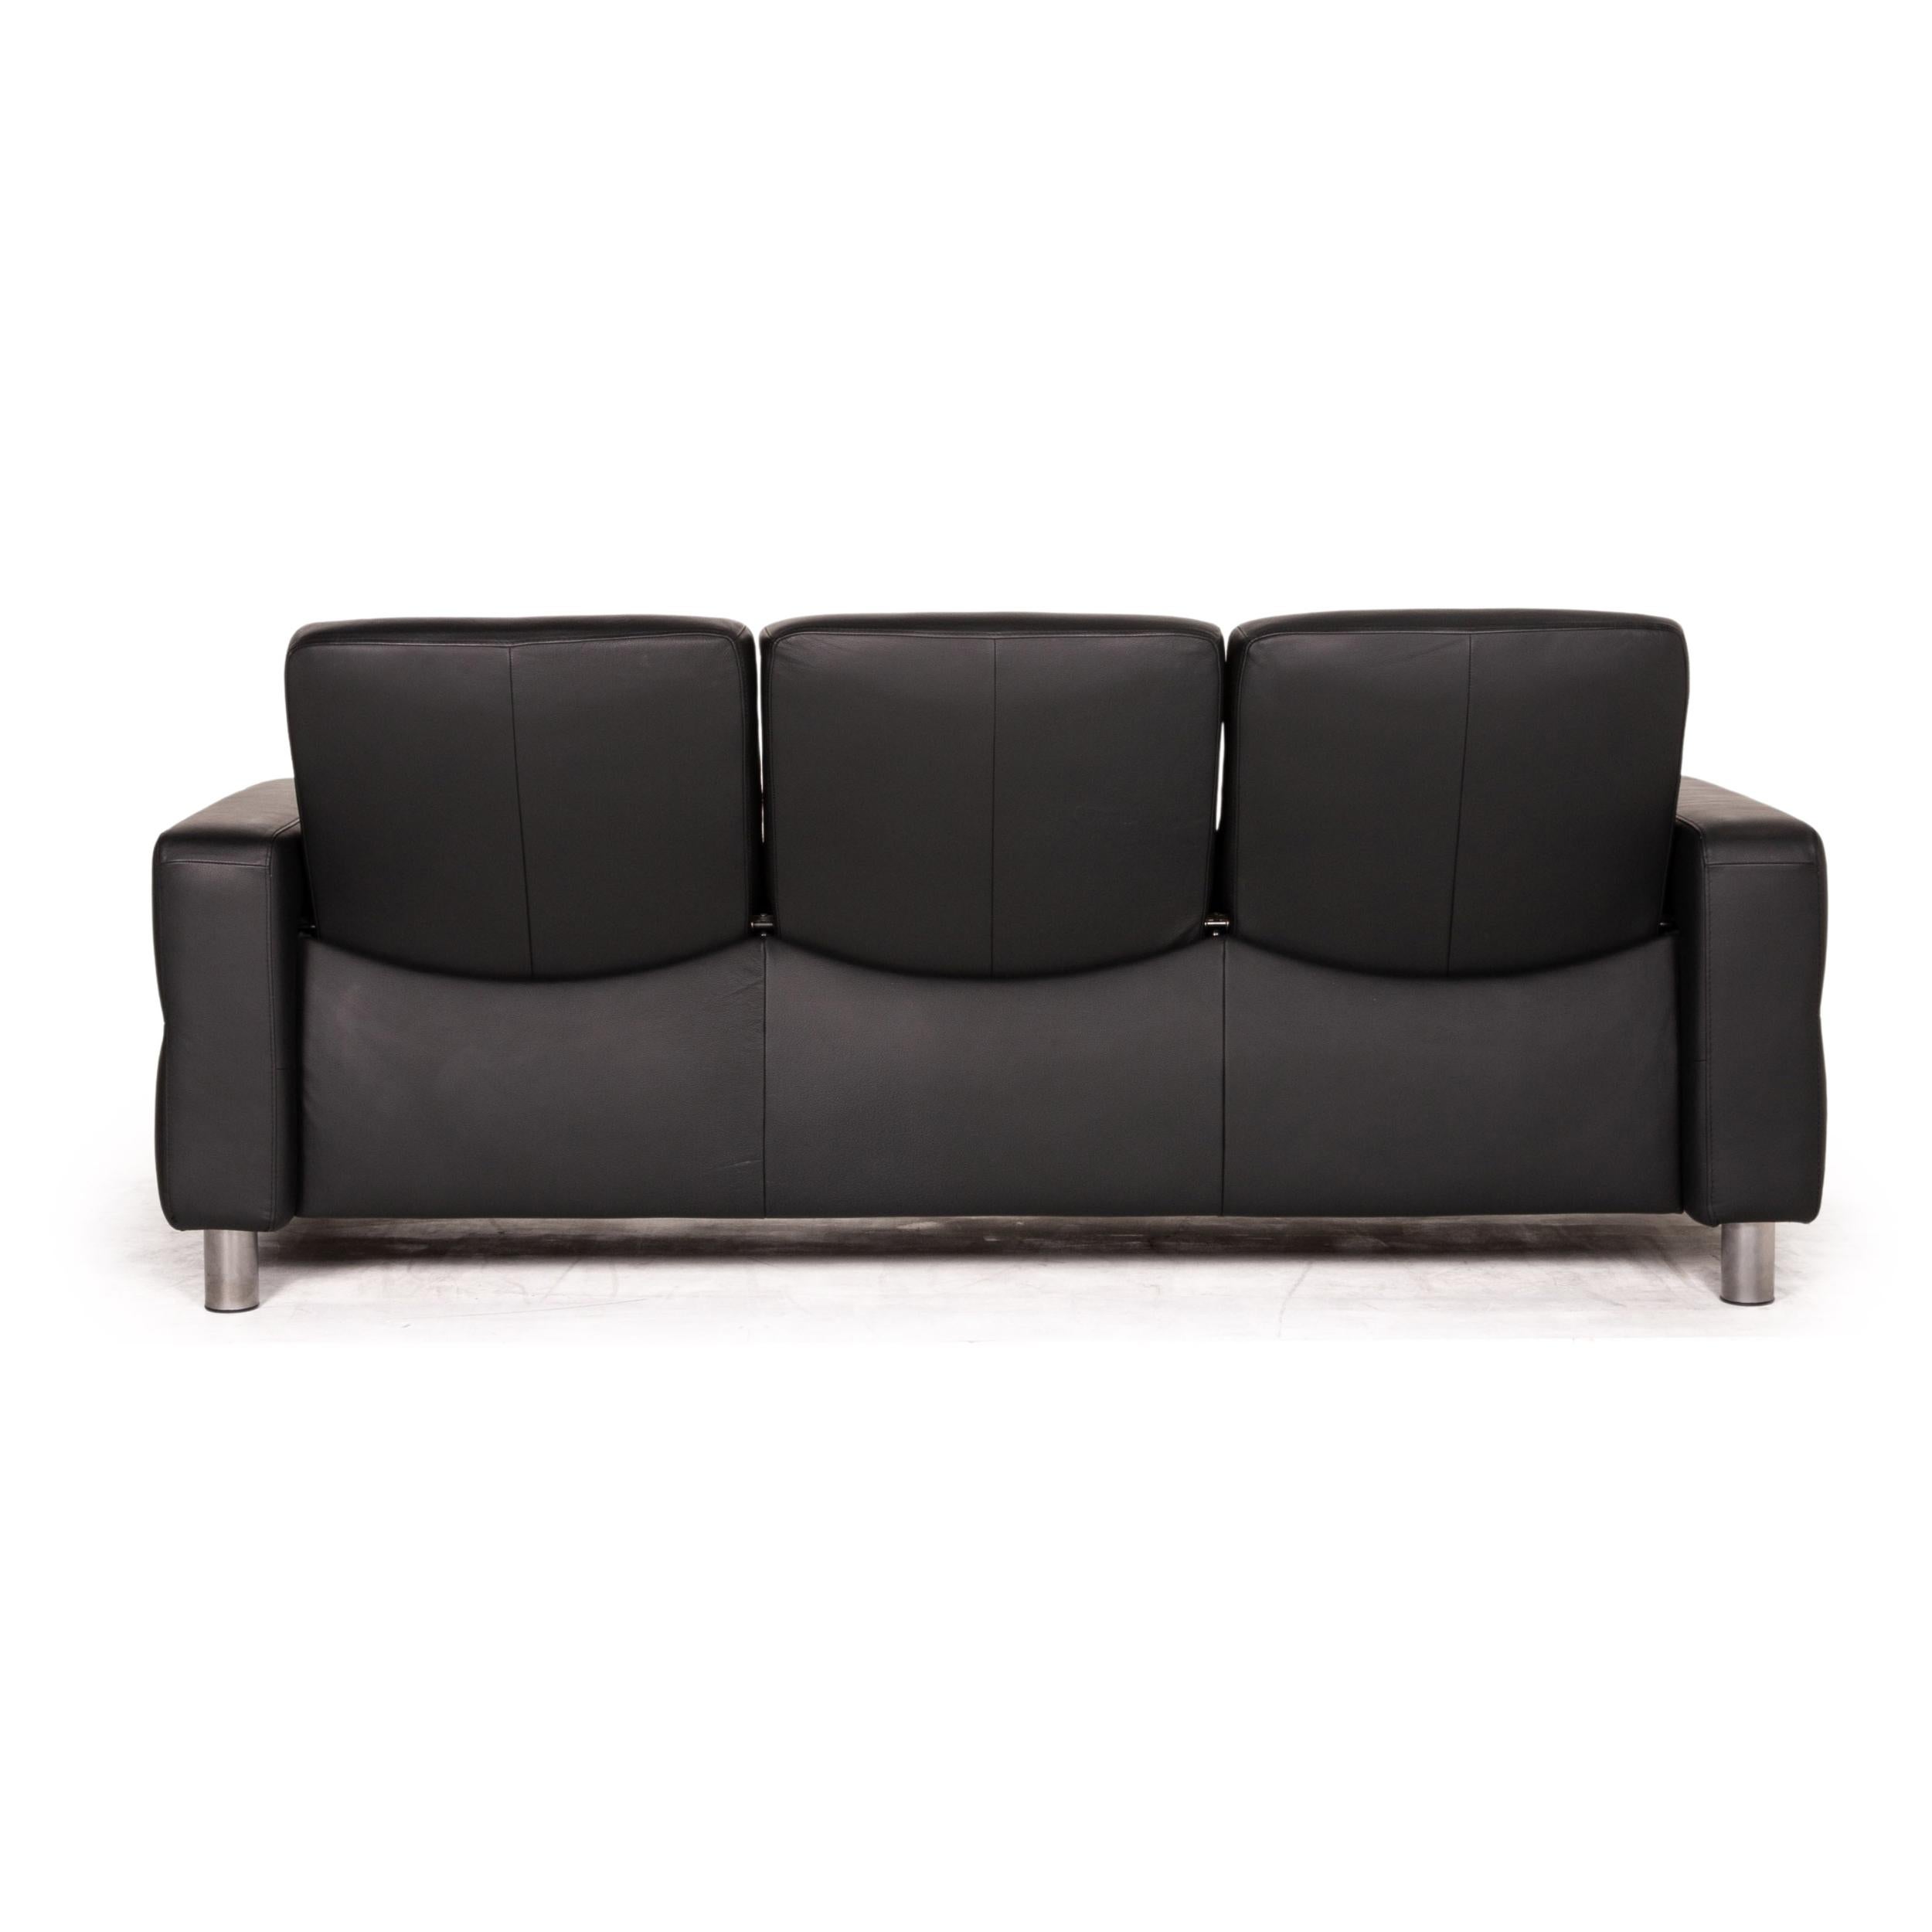 Stressless Waver Three Seater Leather Sofa Black Couch 4